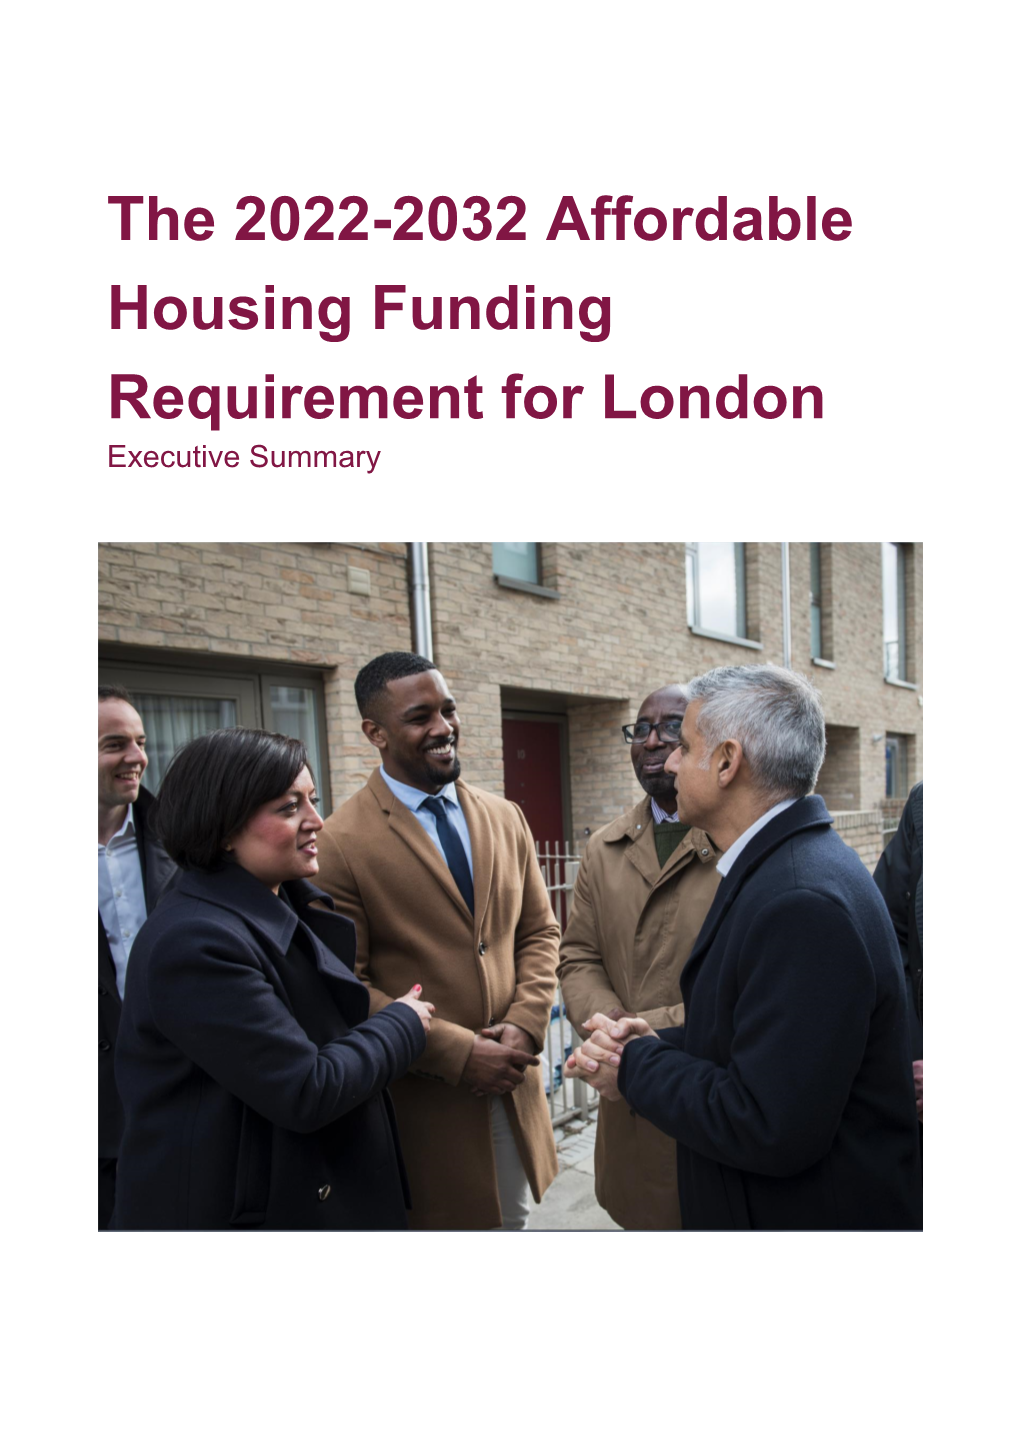 The 2022-2032 Affordable Housing Funding Requirement for London Executive Summary